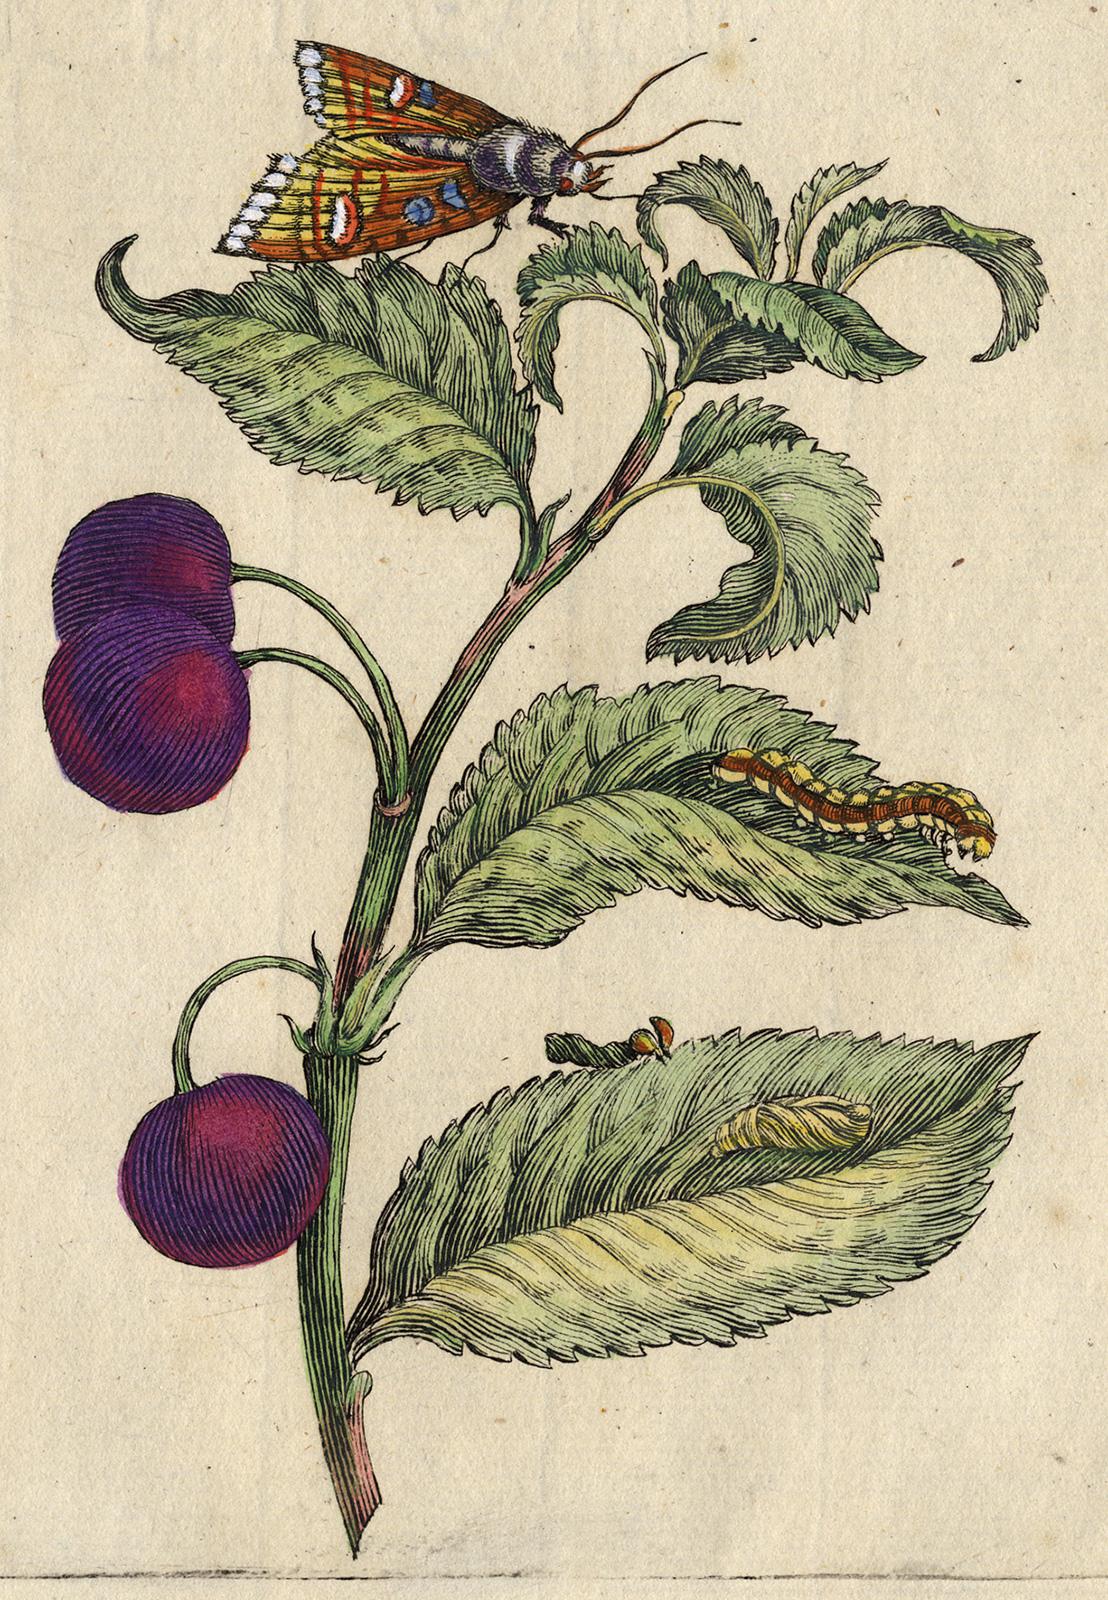 Morello Cherry with insects by Merian - Handcoloured engraving - 18th century - Print by Maria Sybilla Merian